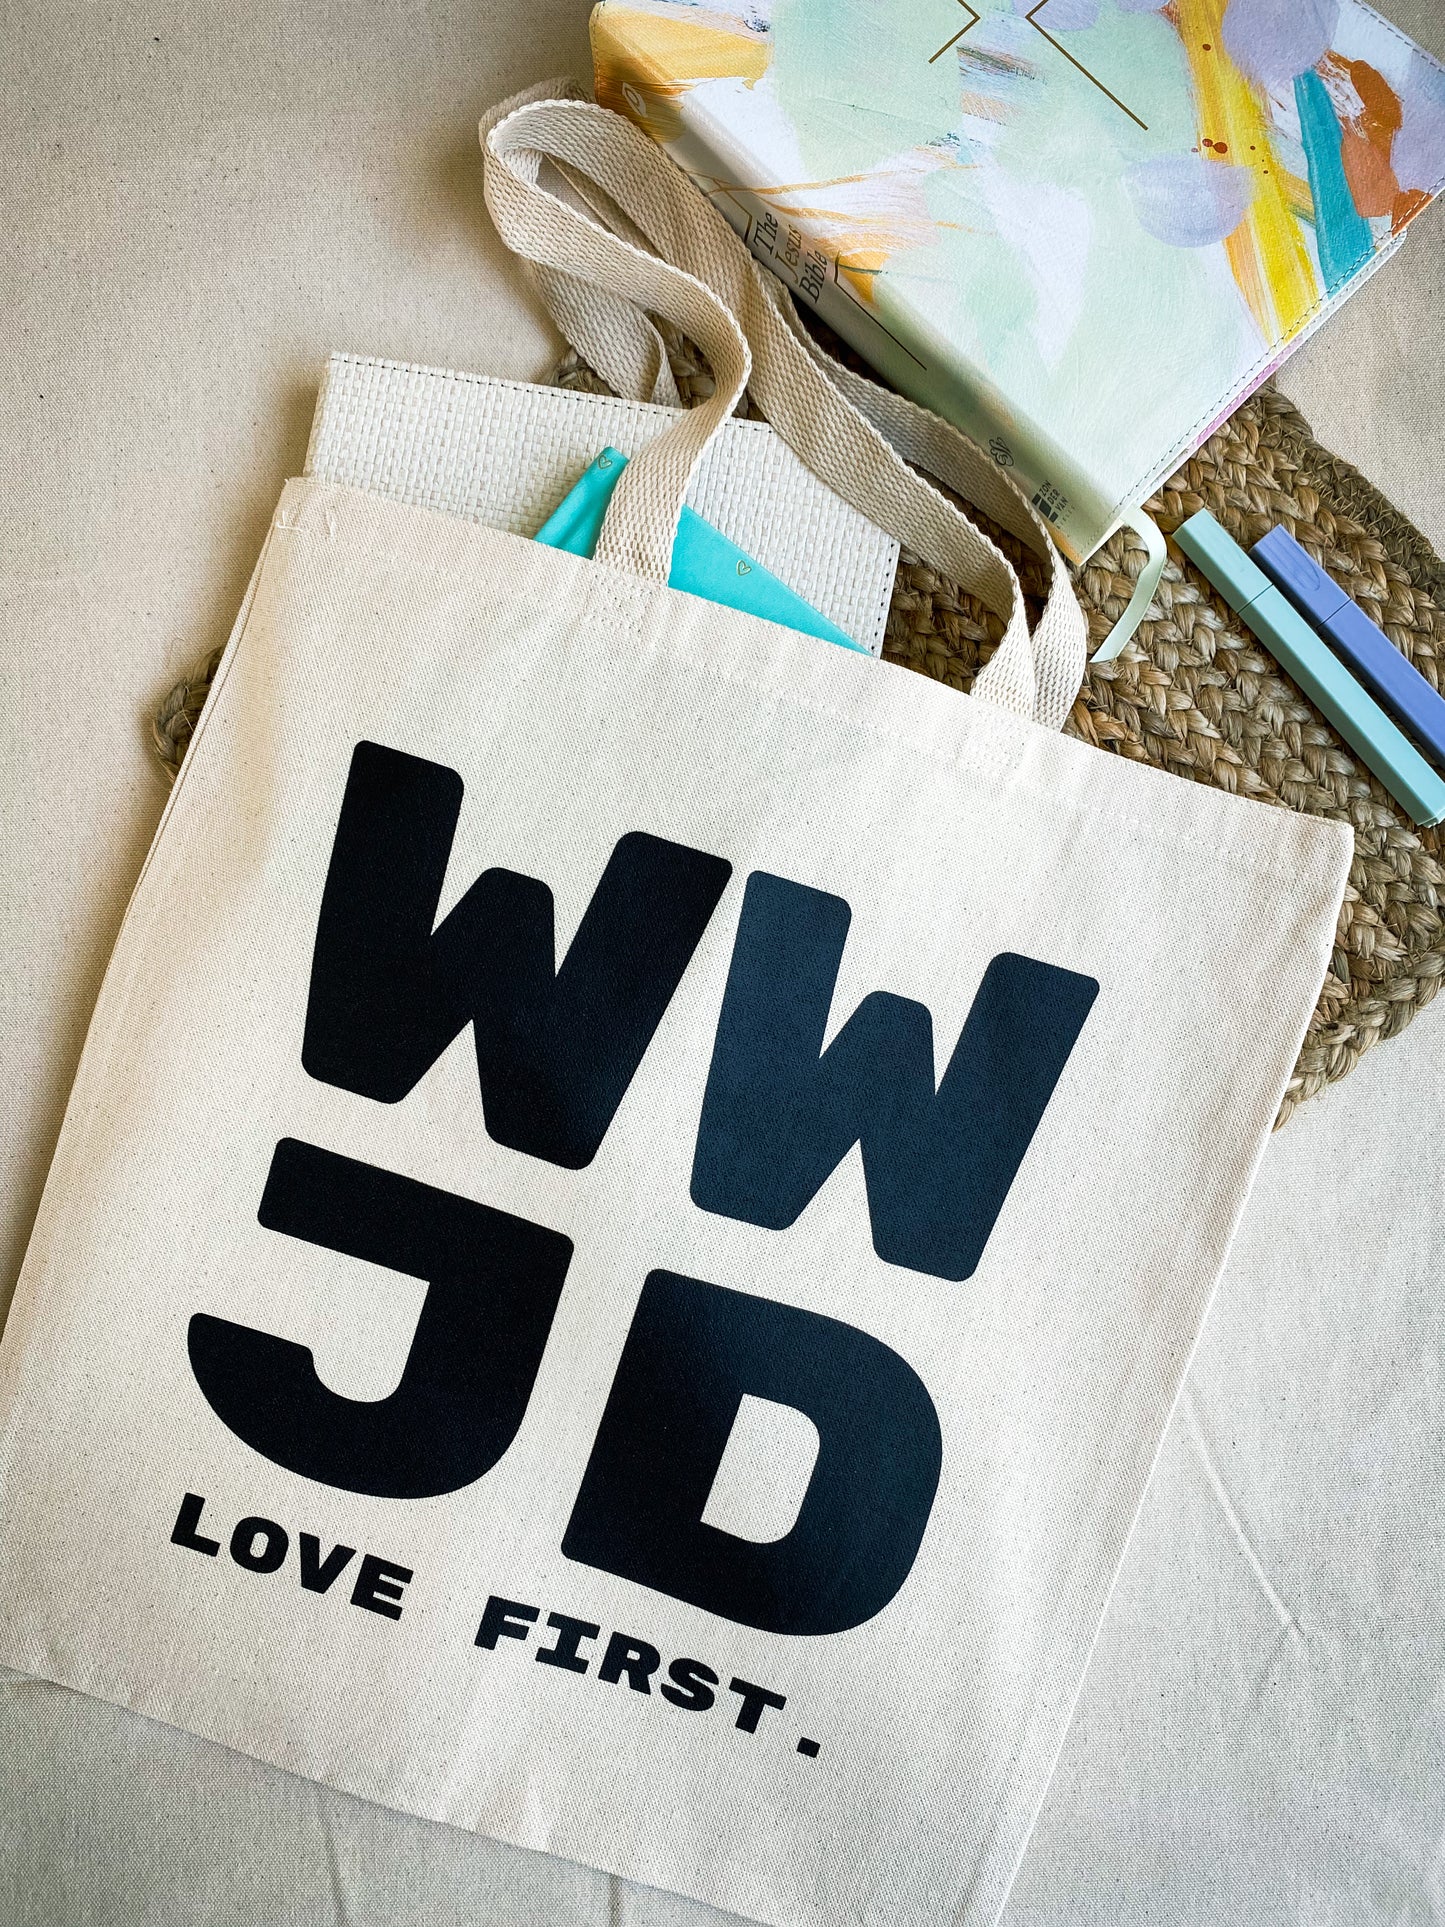 WWJD Love First Tote